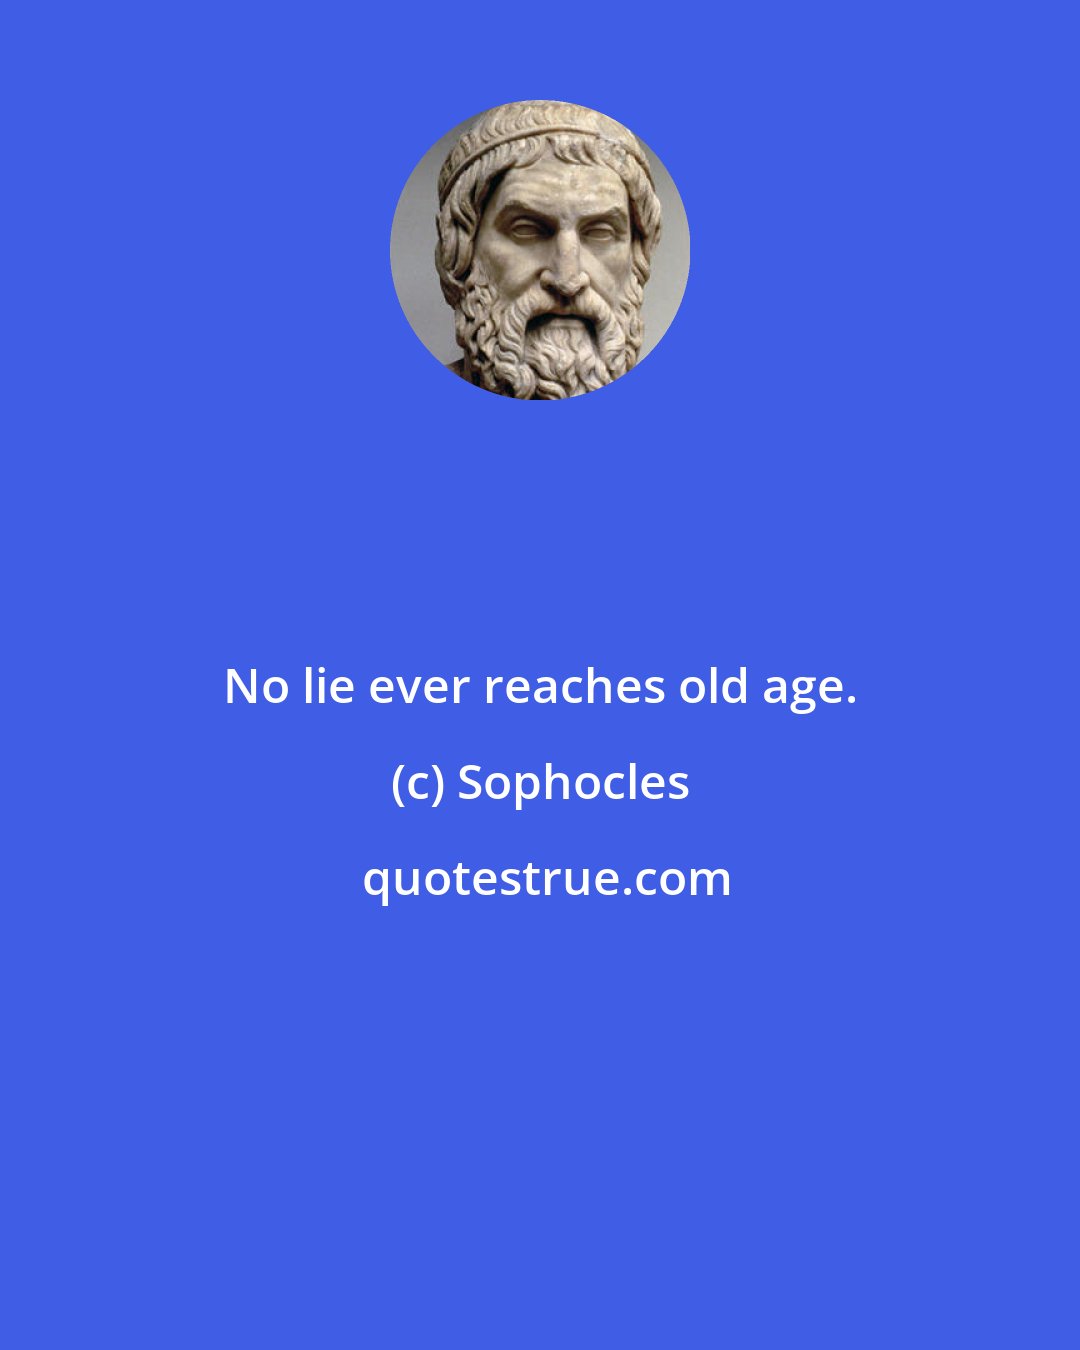 Sophocles: No lie ever reaches old age.